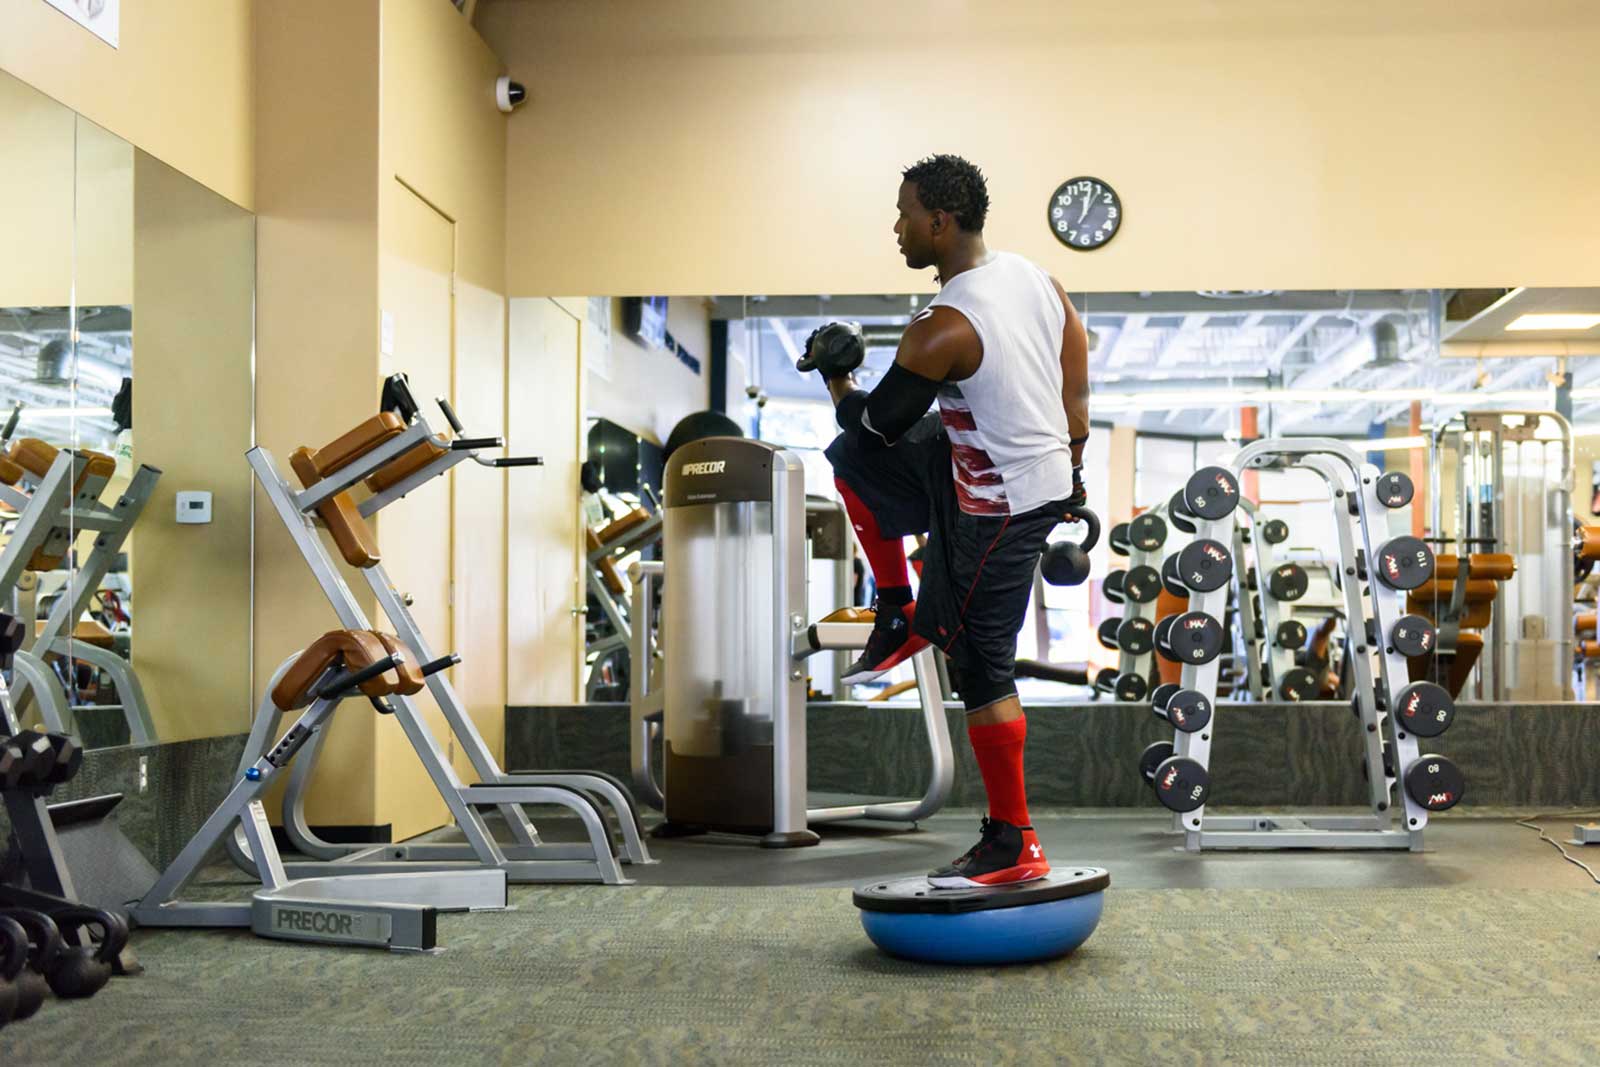 Looking for the Best Workout in Goleta? Look No Further than COAC.